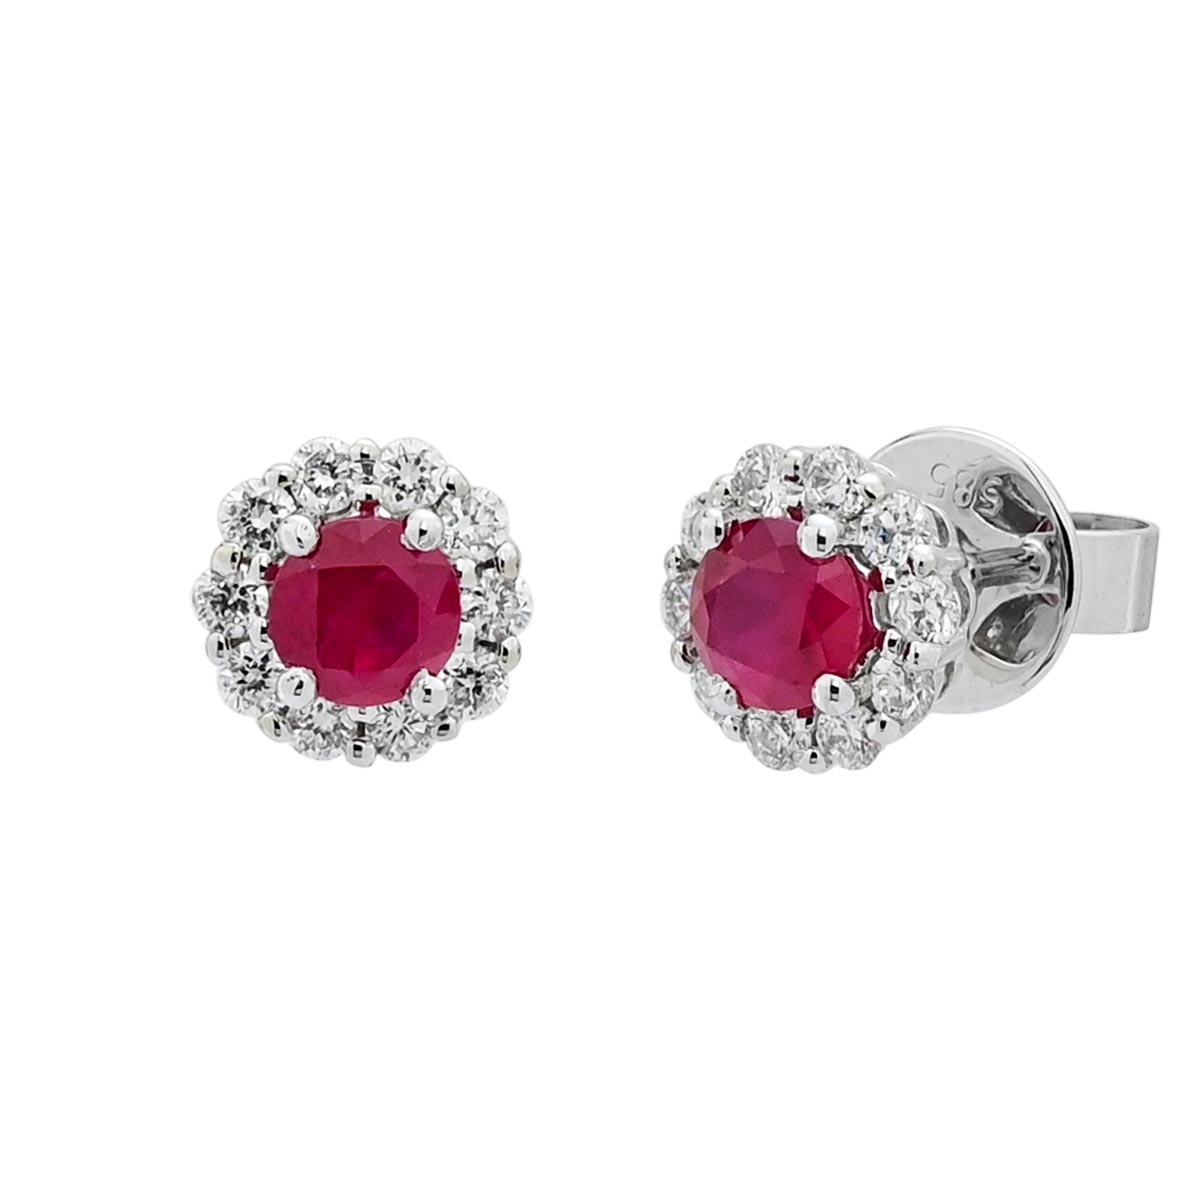 Ruby Halo Stud Earrings in 14kt White Gold with Diamonds (1/4ct tw)